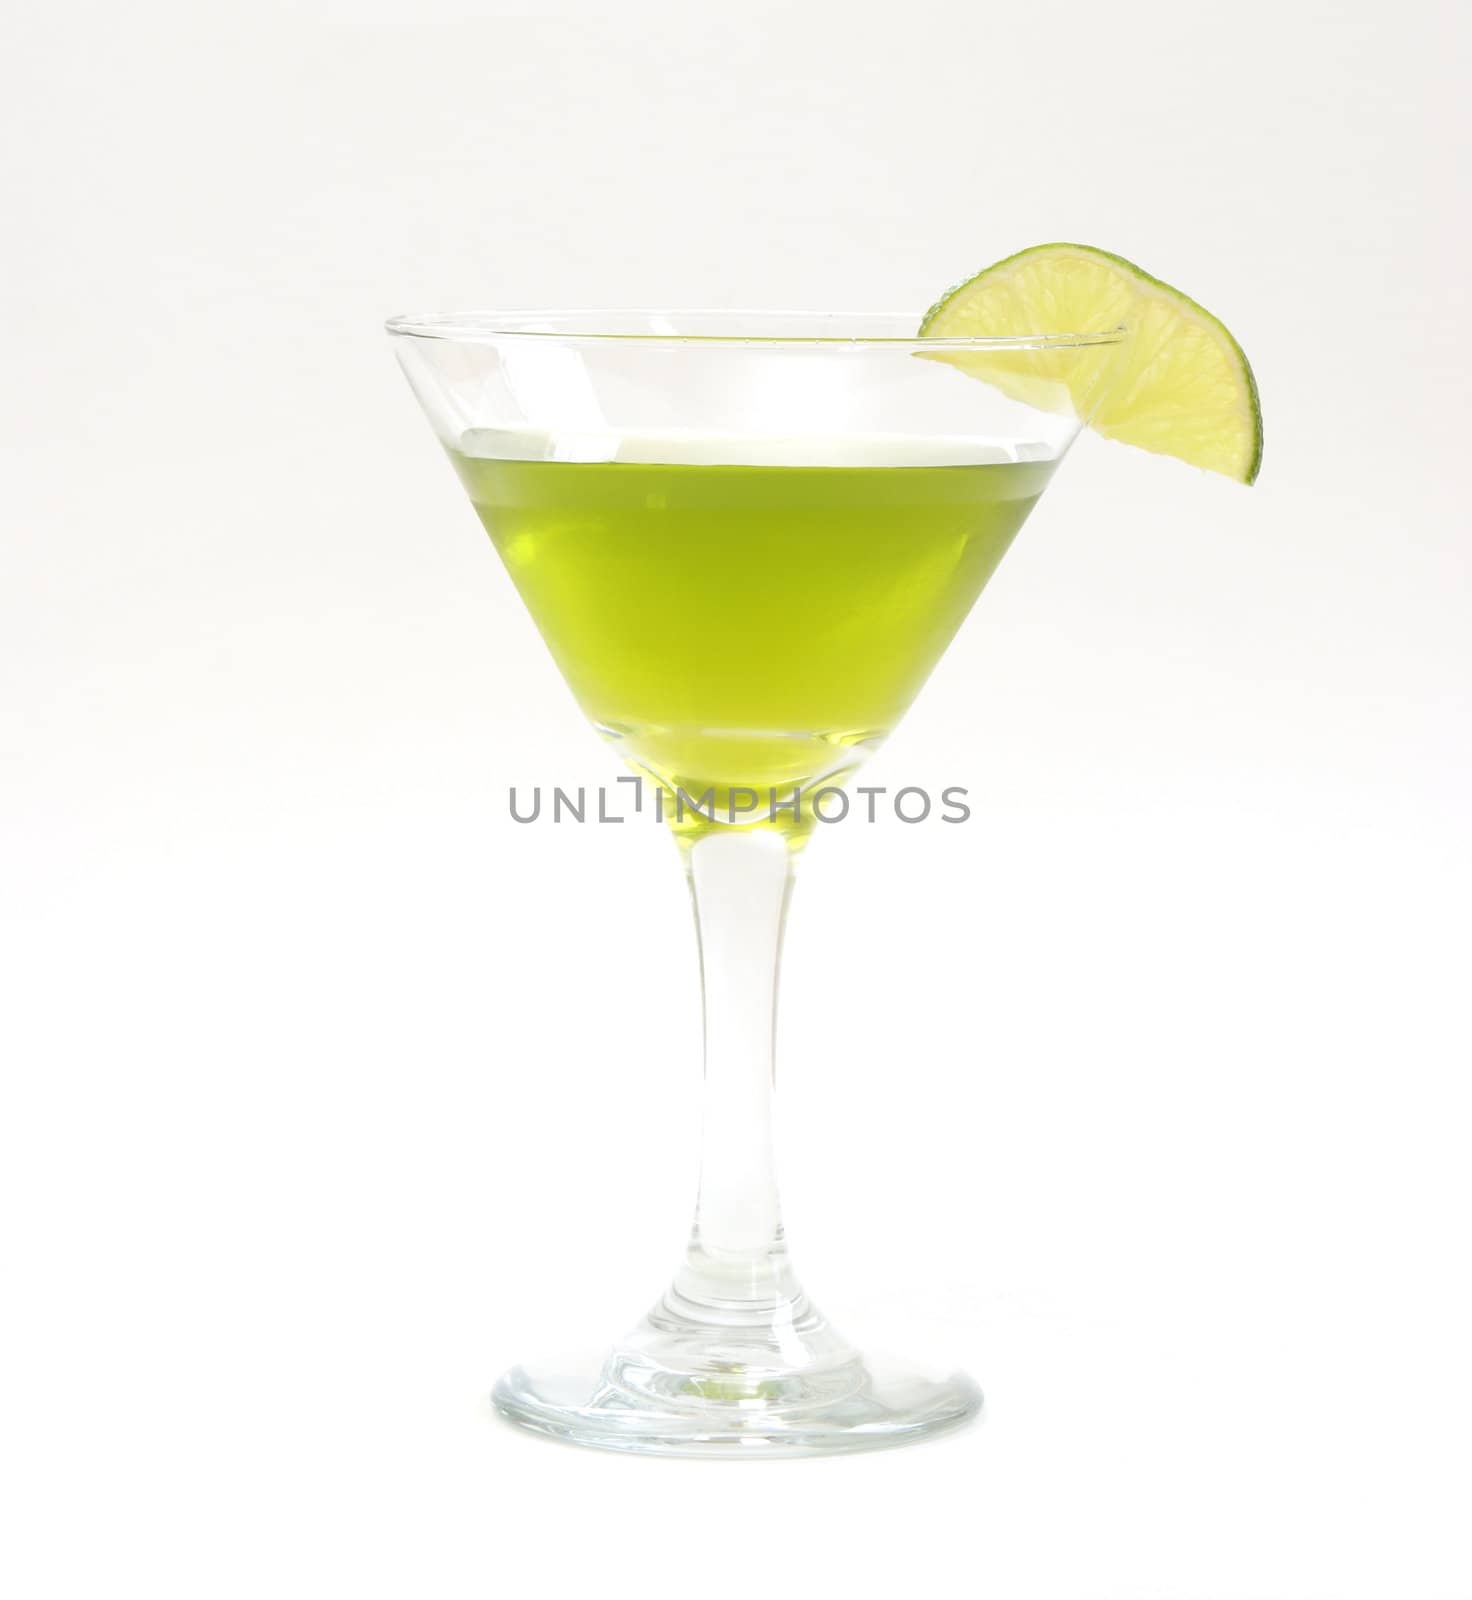 A lime beverage in a martini glass.